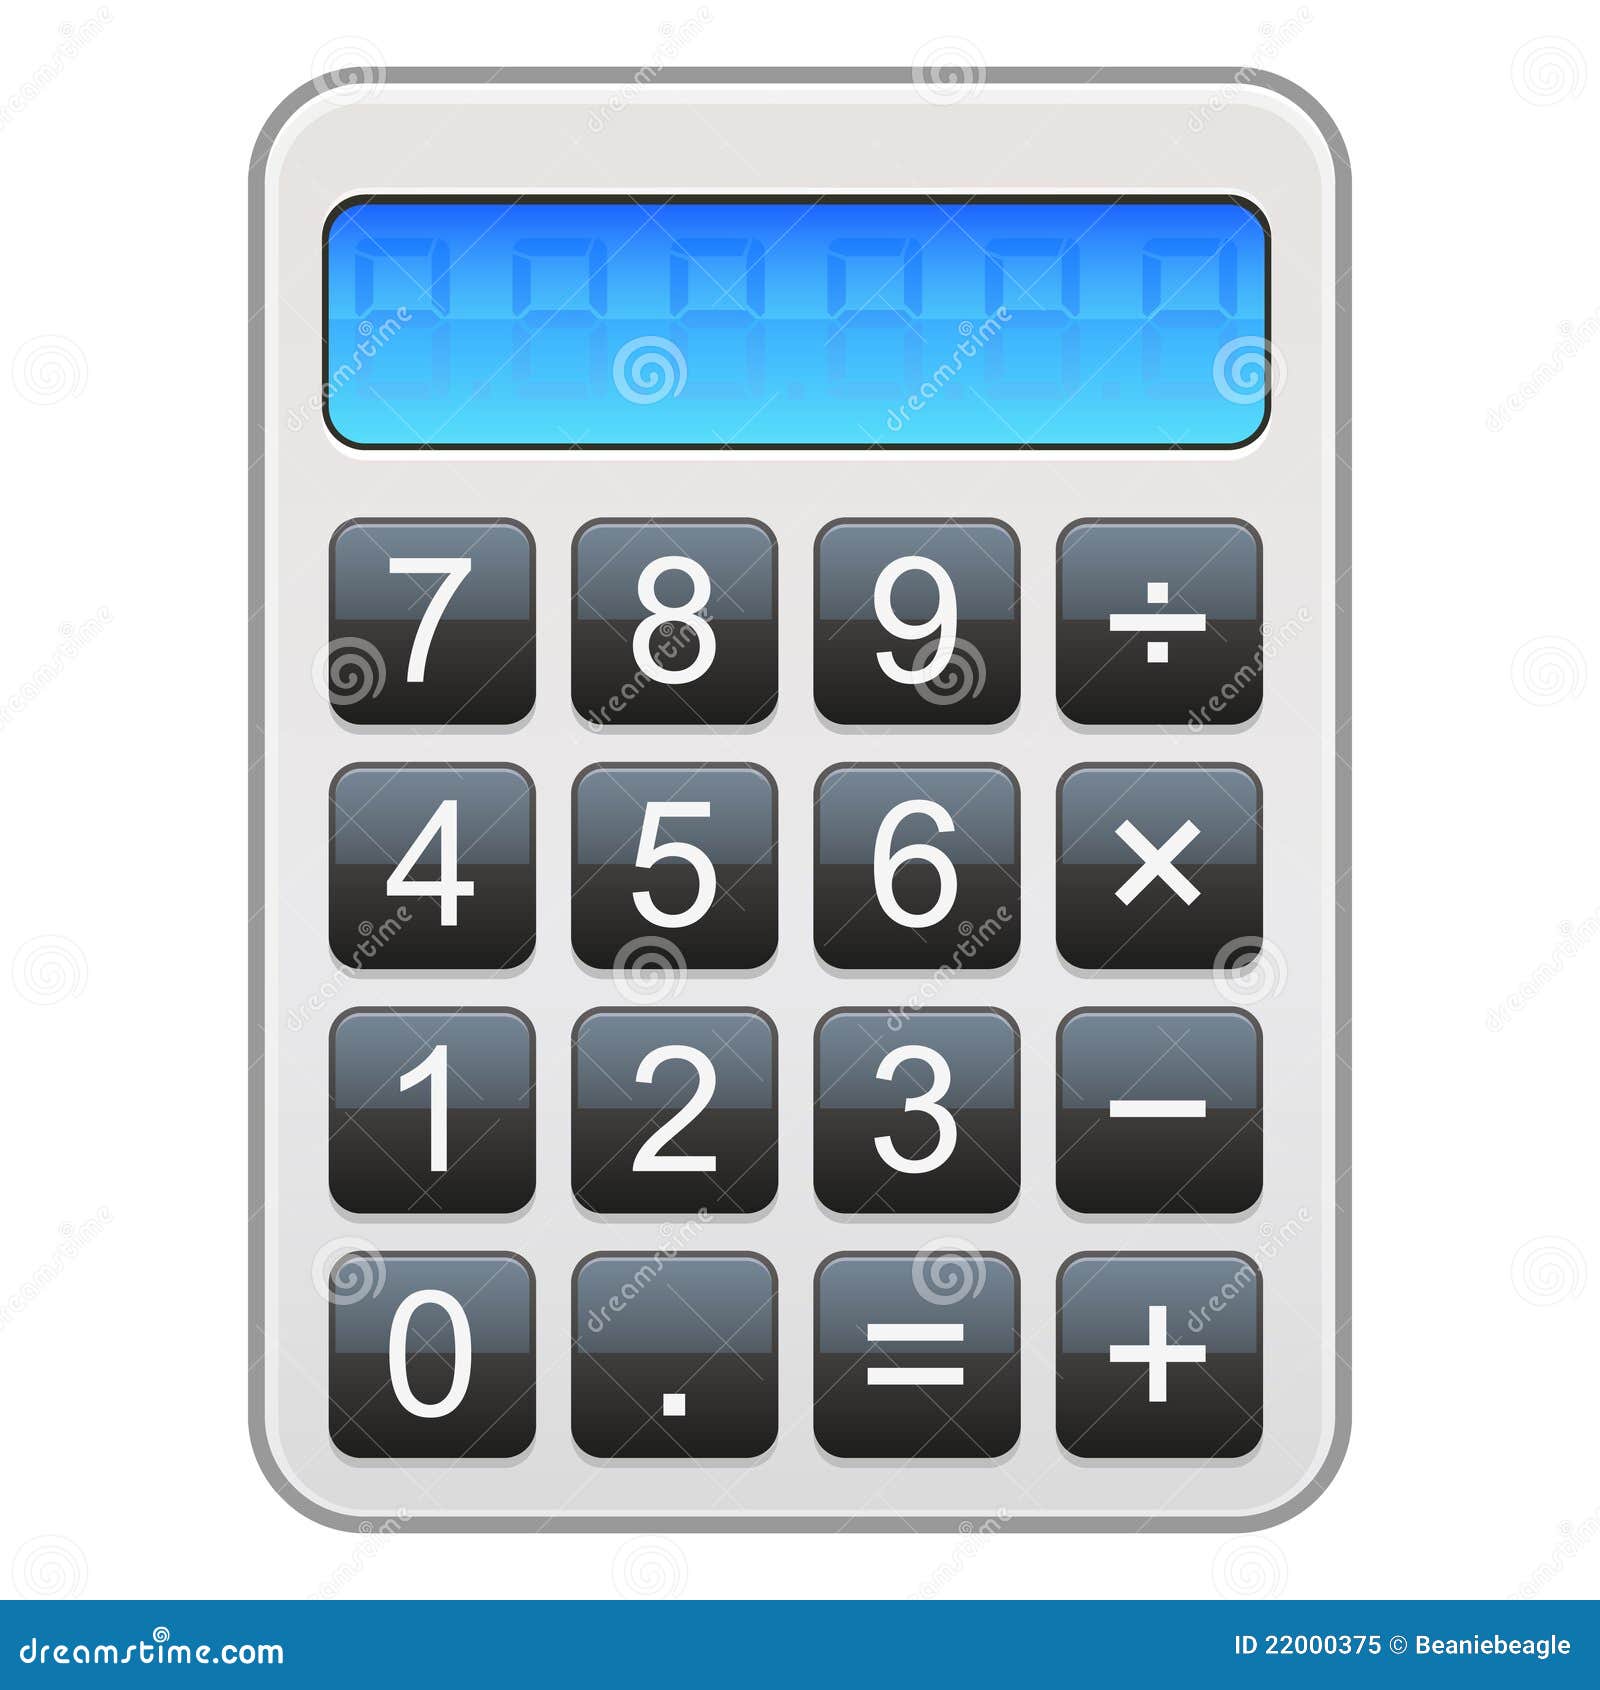 how to calculate in decimals manually